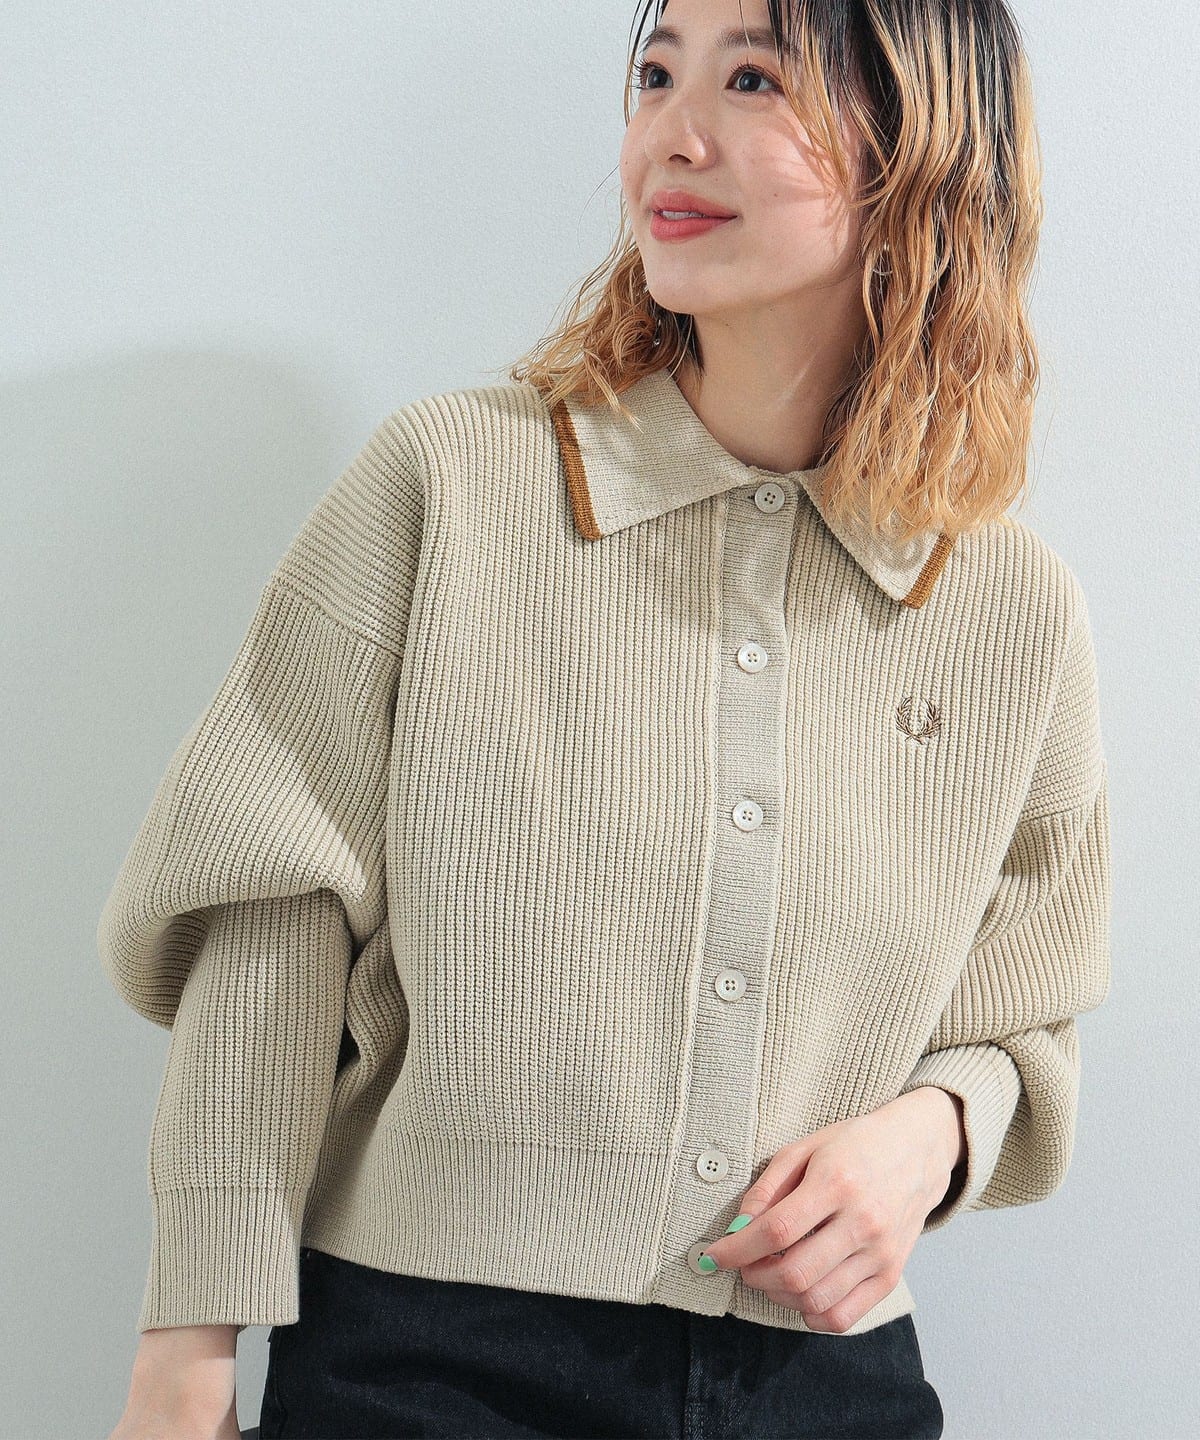 FRED PERRY × Ray BEAMS ニット ポロシャツ　美品